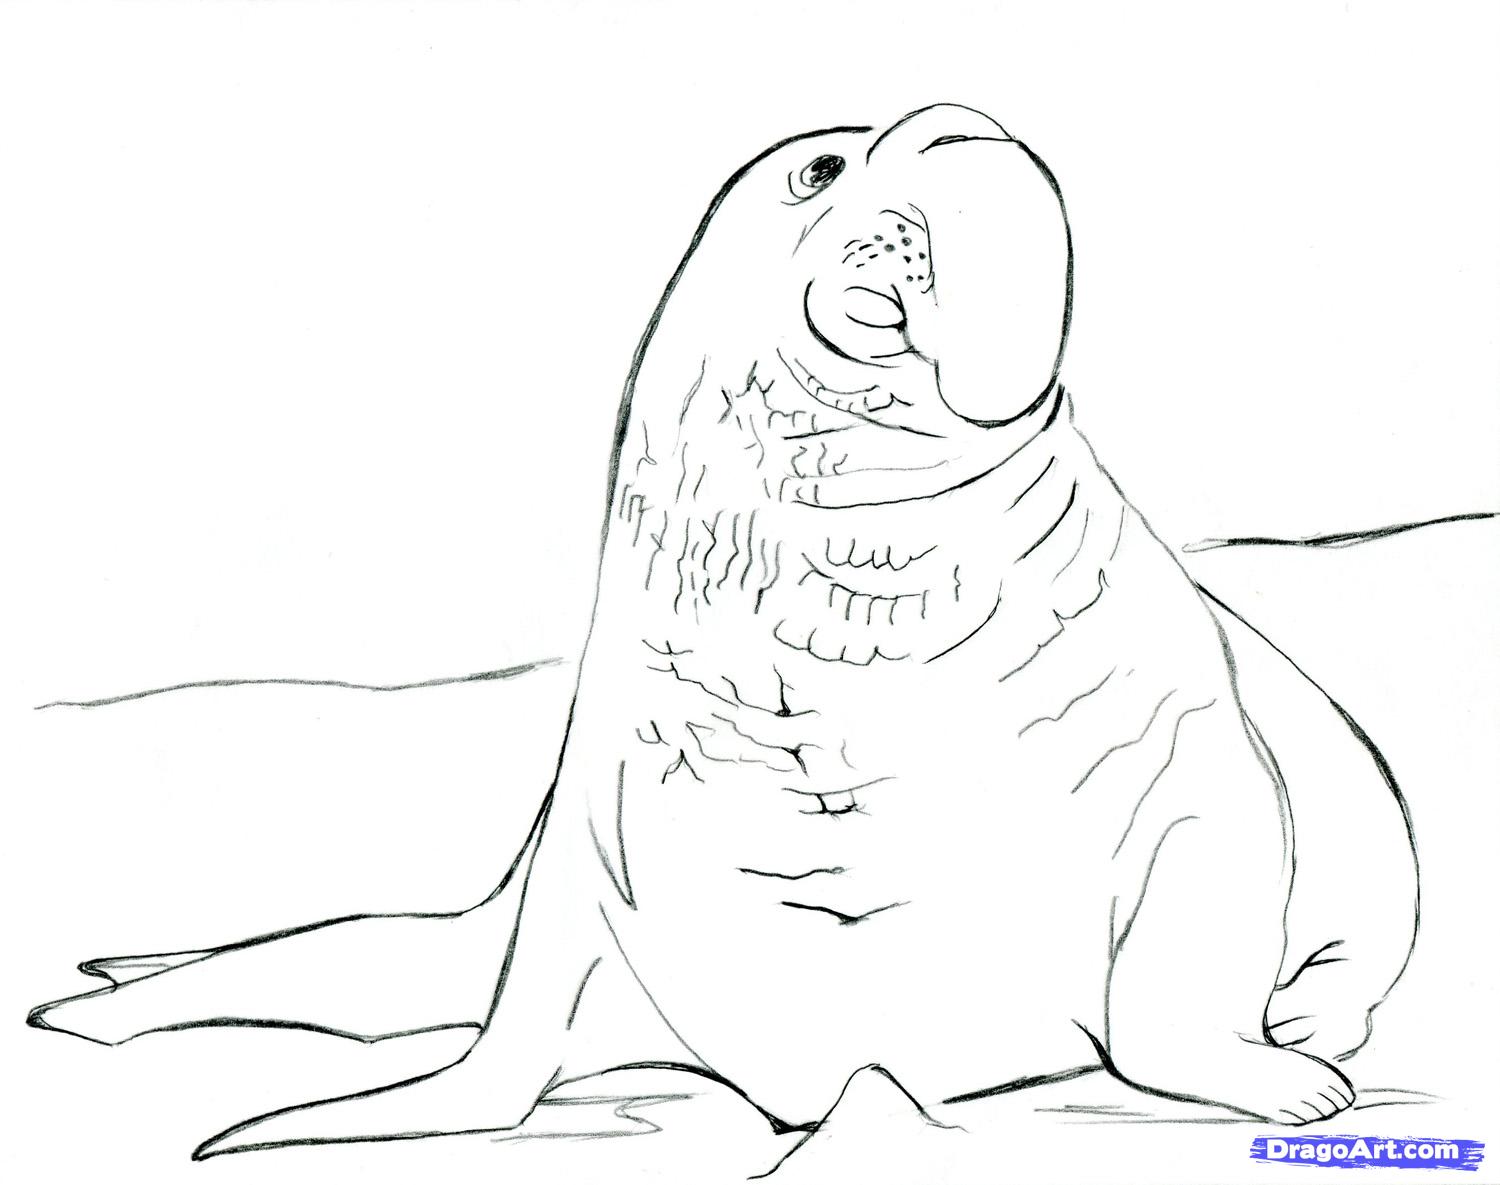 Elephant Seal coloring #12, Download drawings